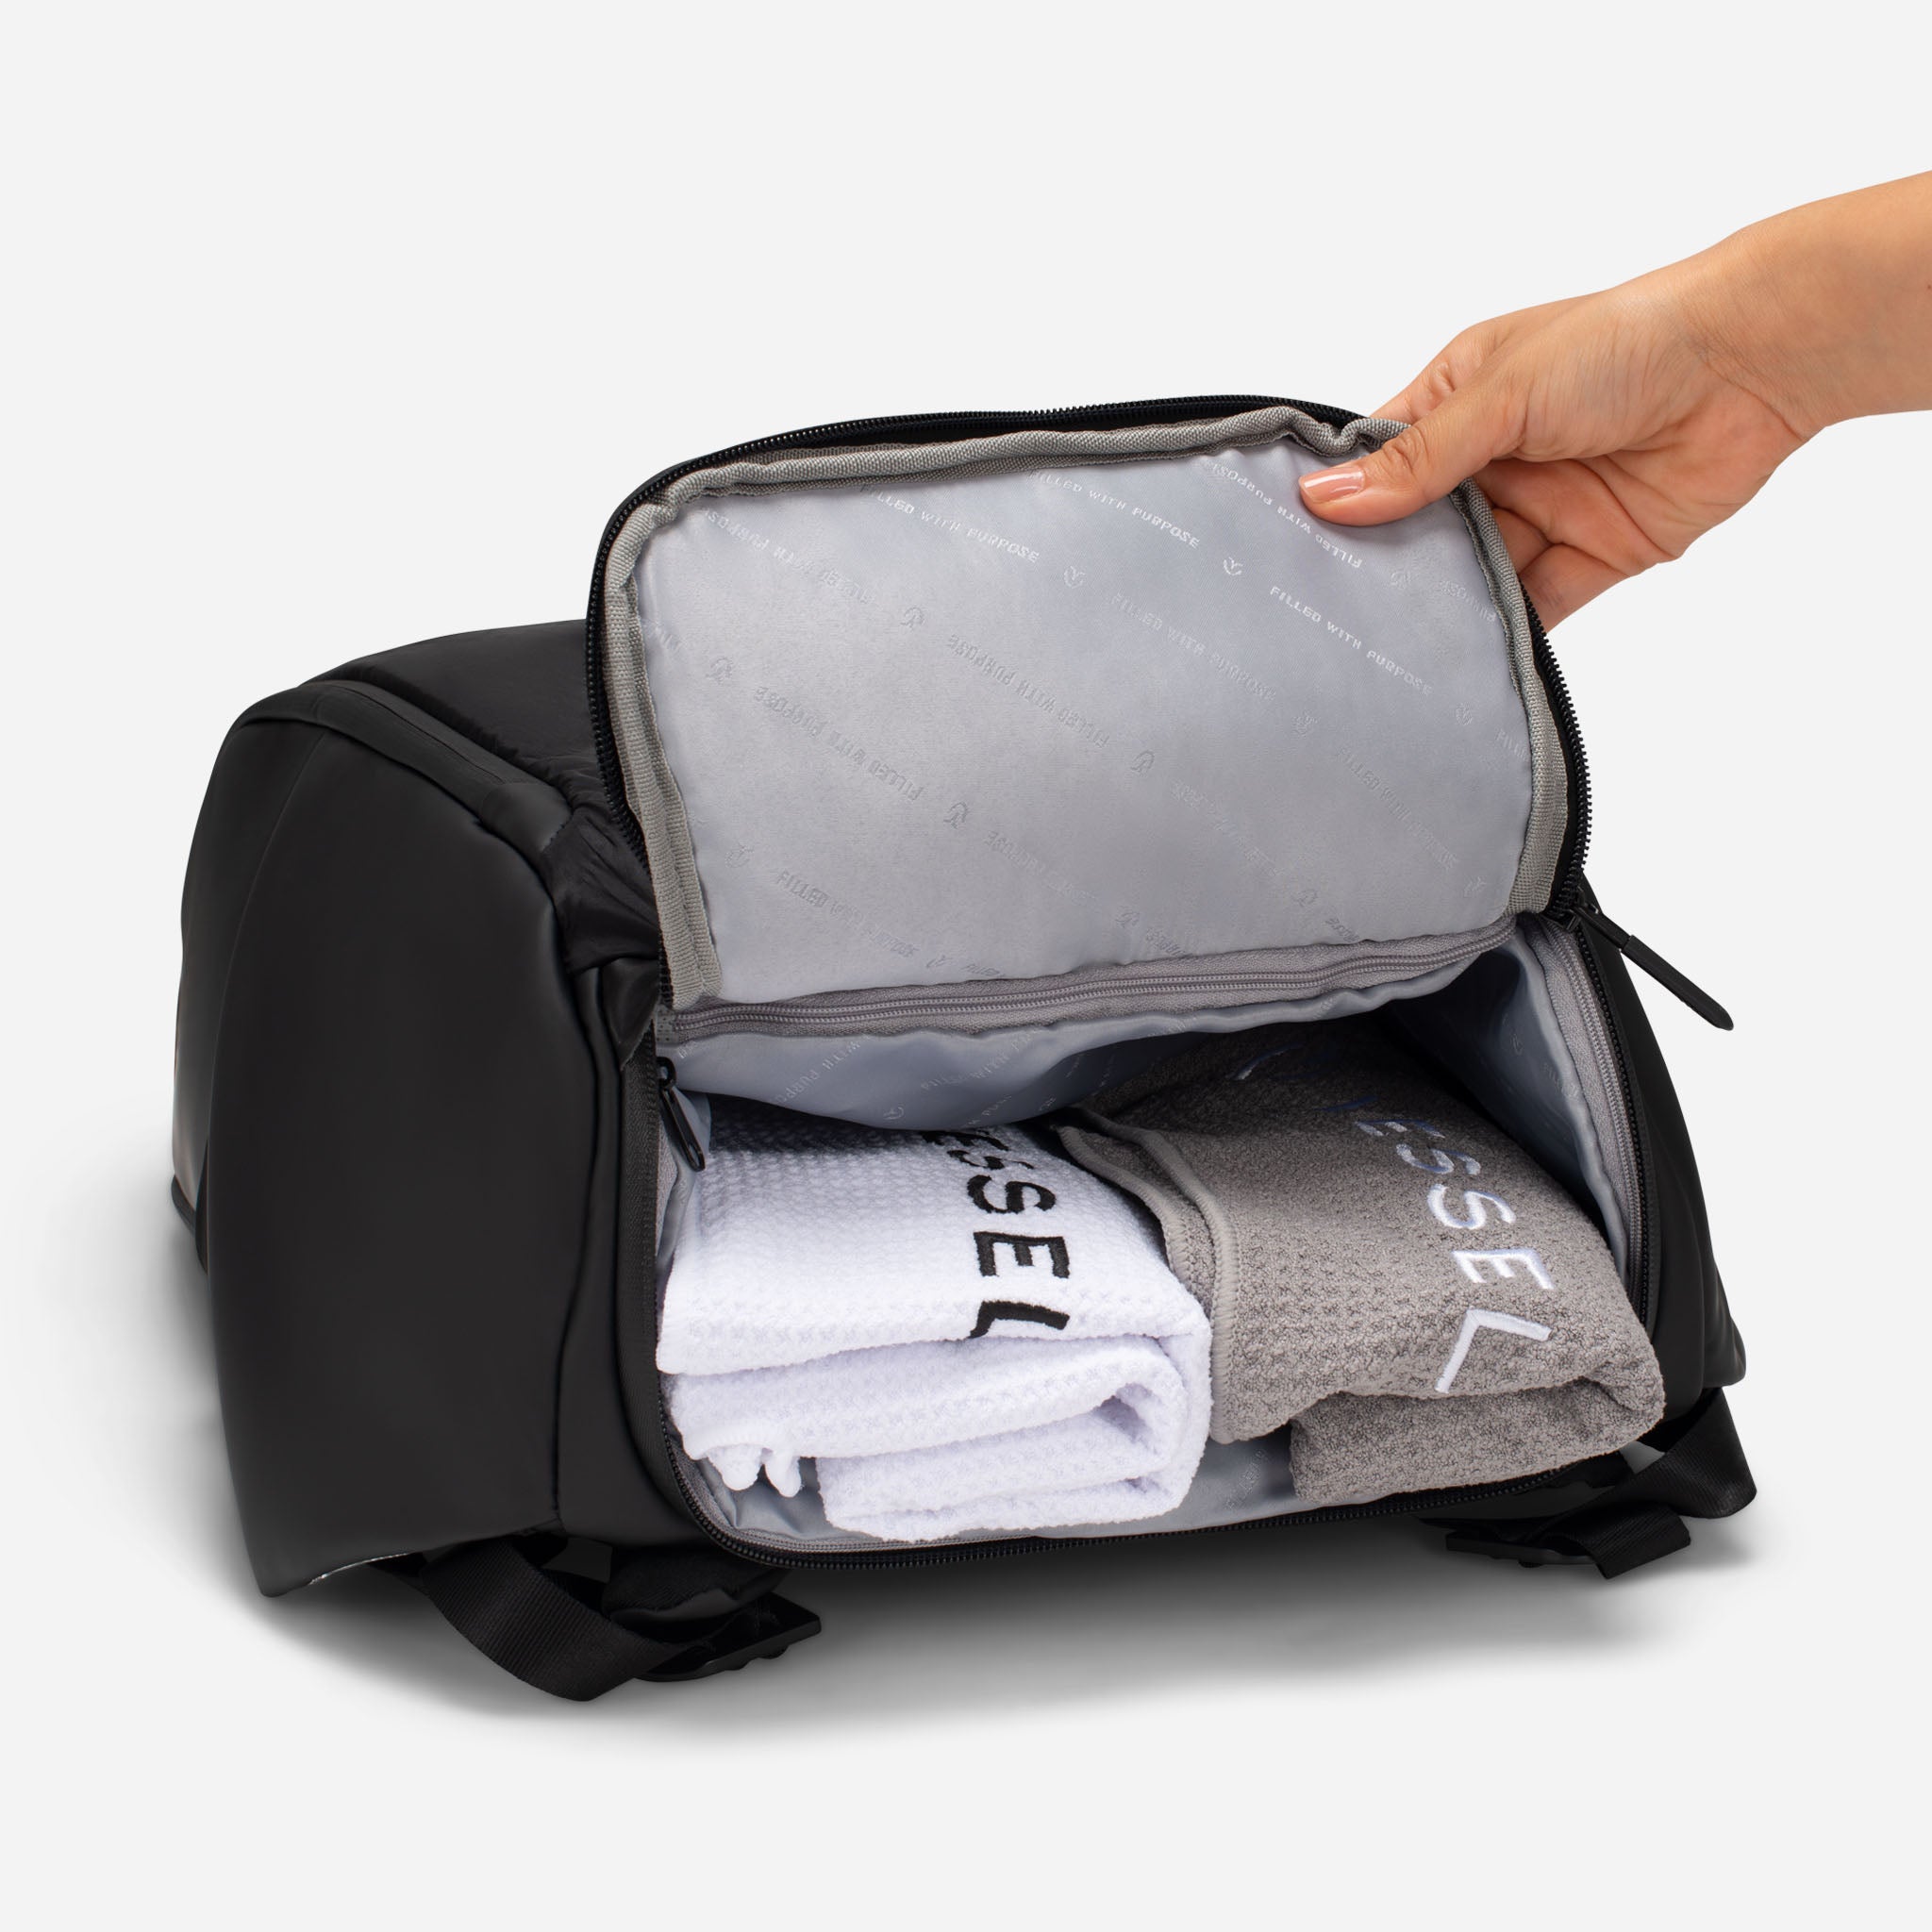 Open bottom of black tennis back pack with folded white and grey towels inside